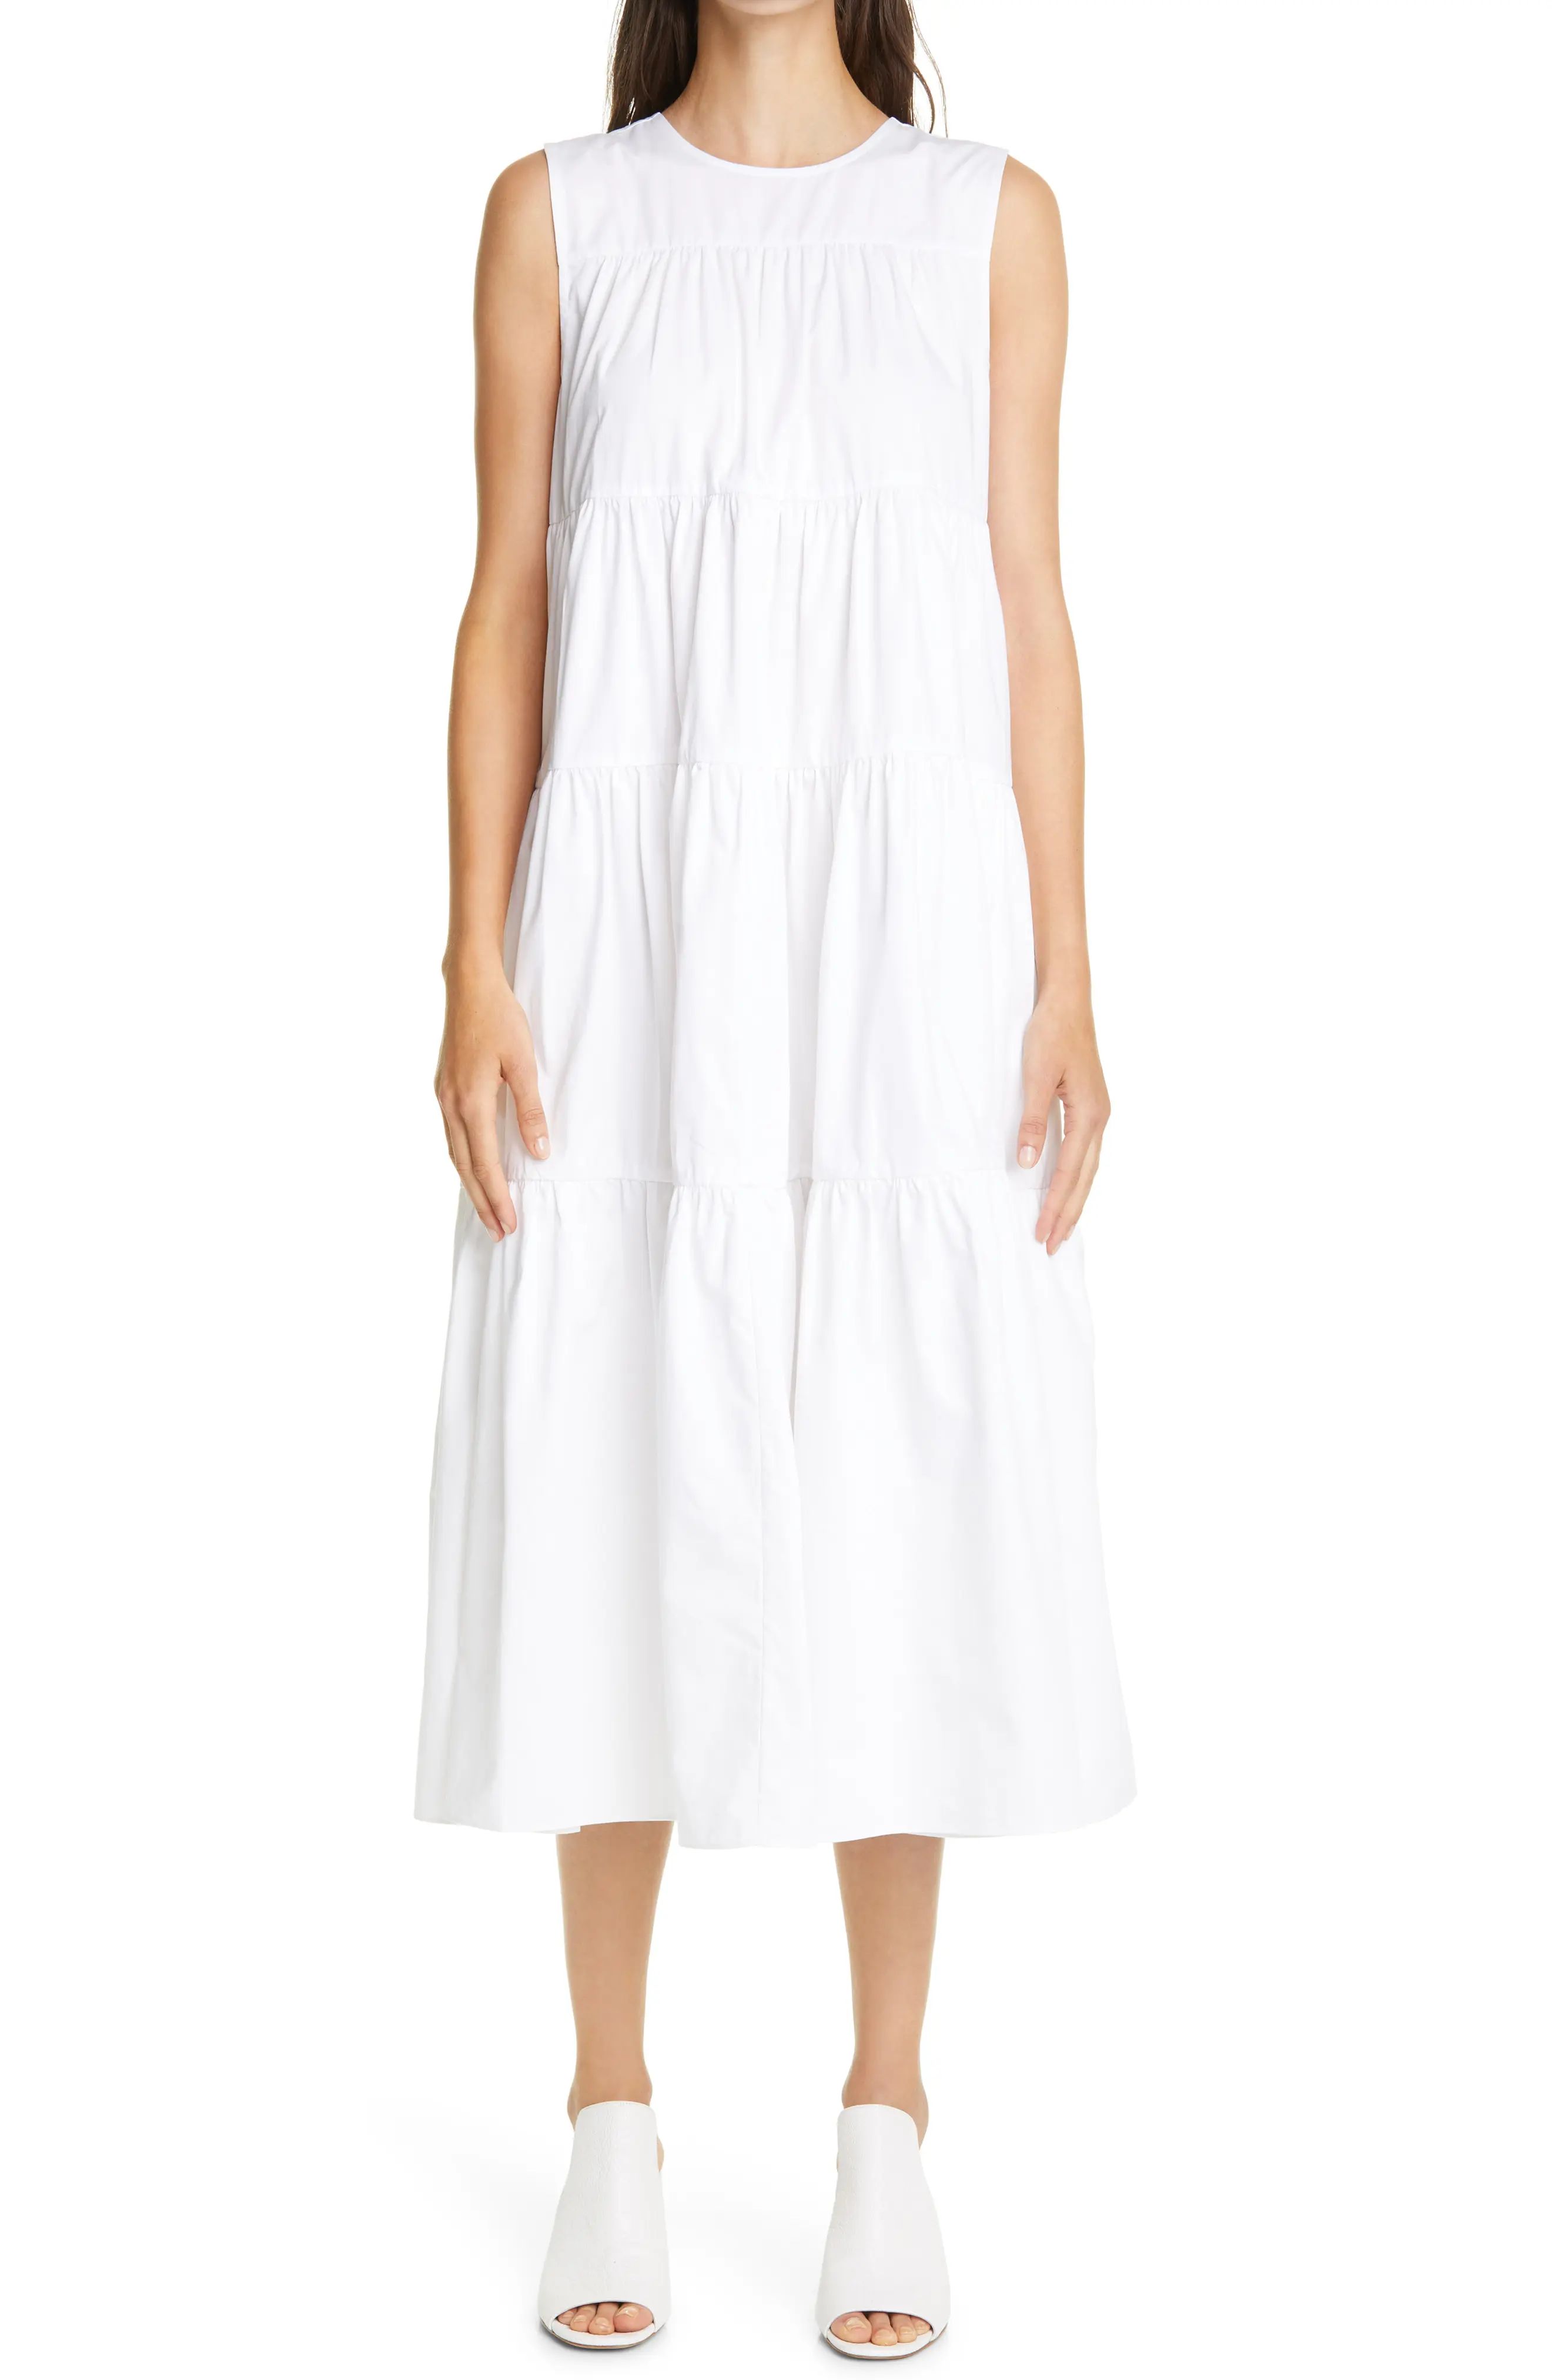 Women's Co Tiered Cotton Midi Dress, Size Large - White | Nordstrom